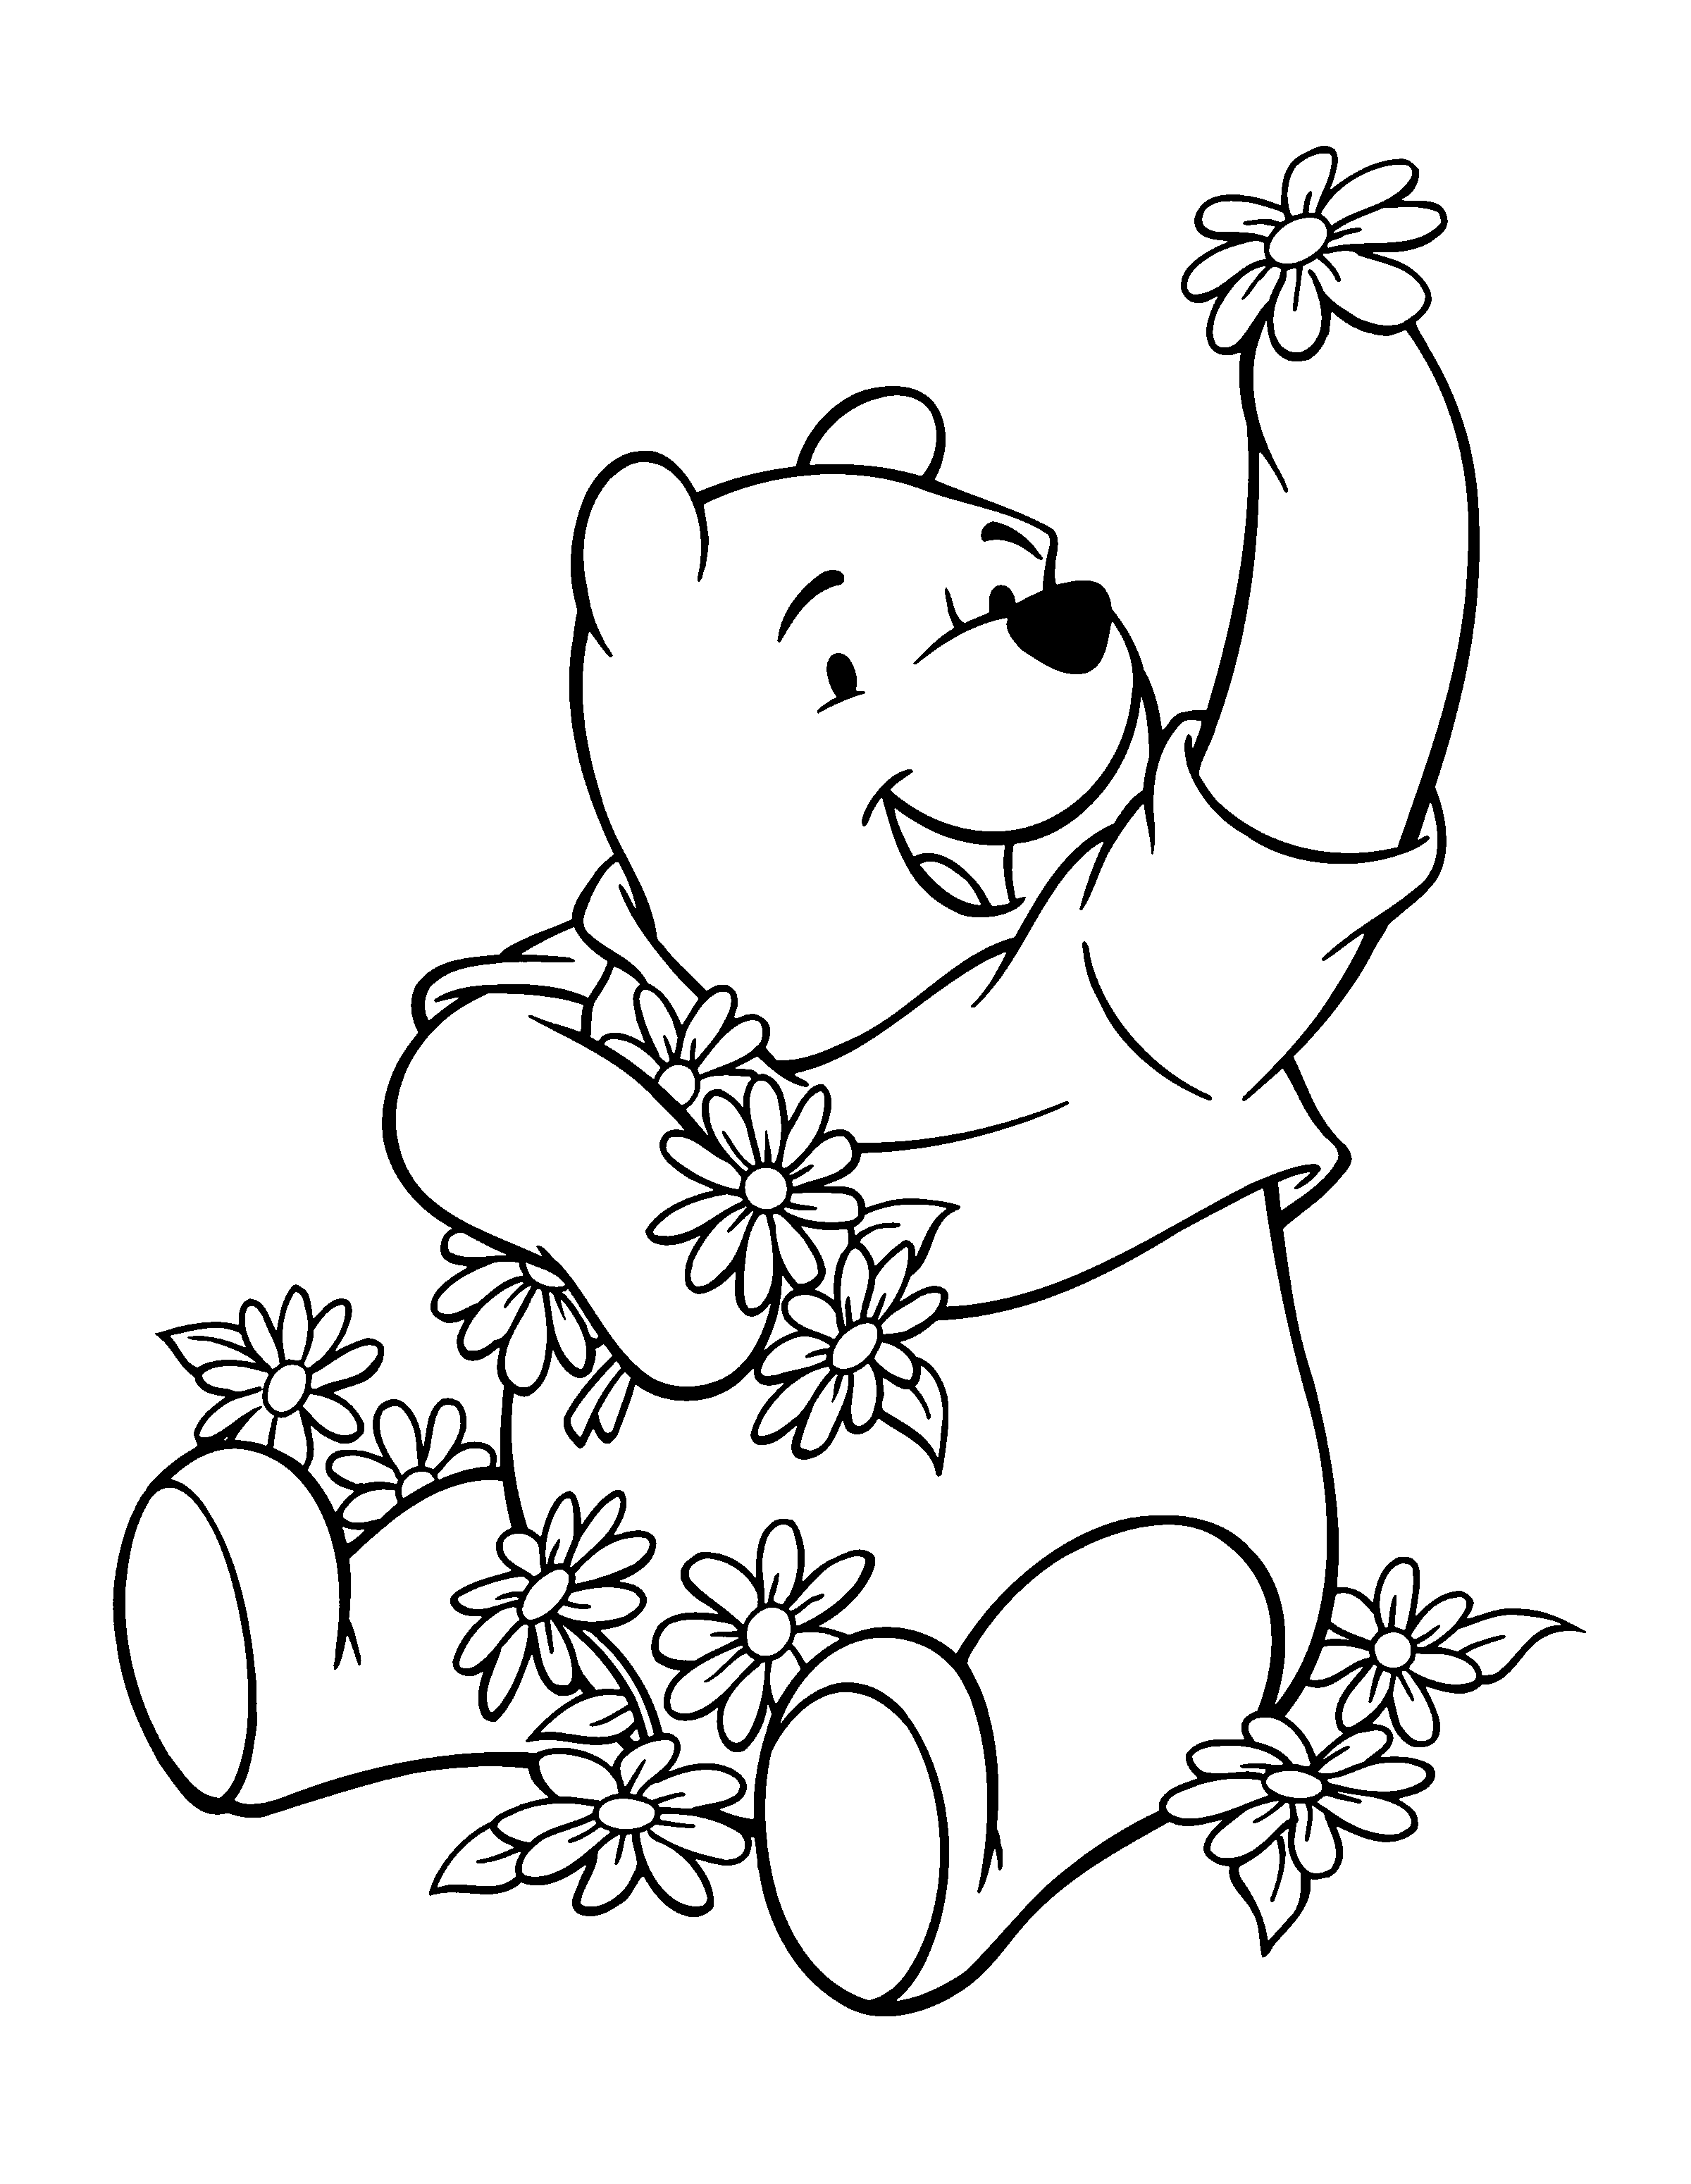 winnie the pooh and friends coloring pages christmas